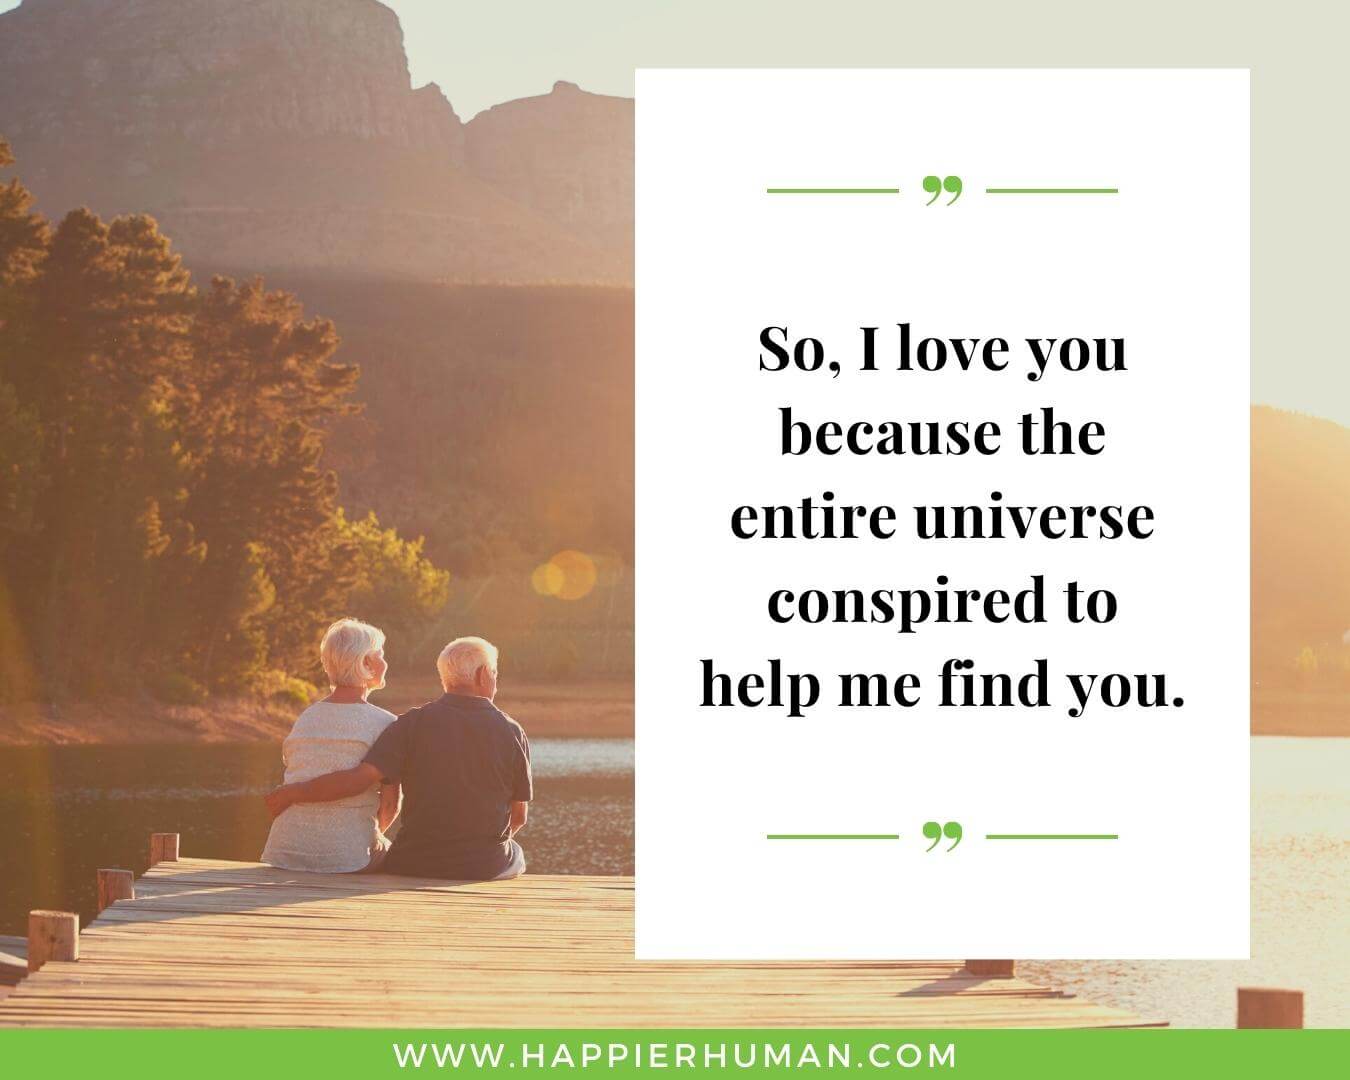 Unconditional Love Quotes for Her - “So, I love you because the entire universe conspired to help me find you.”